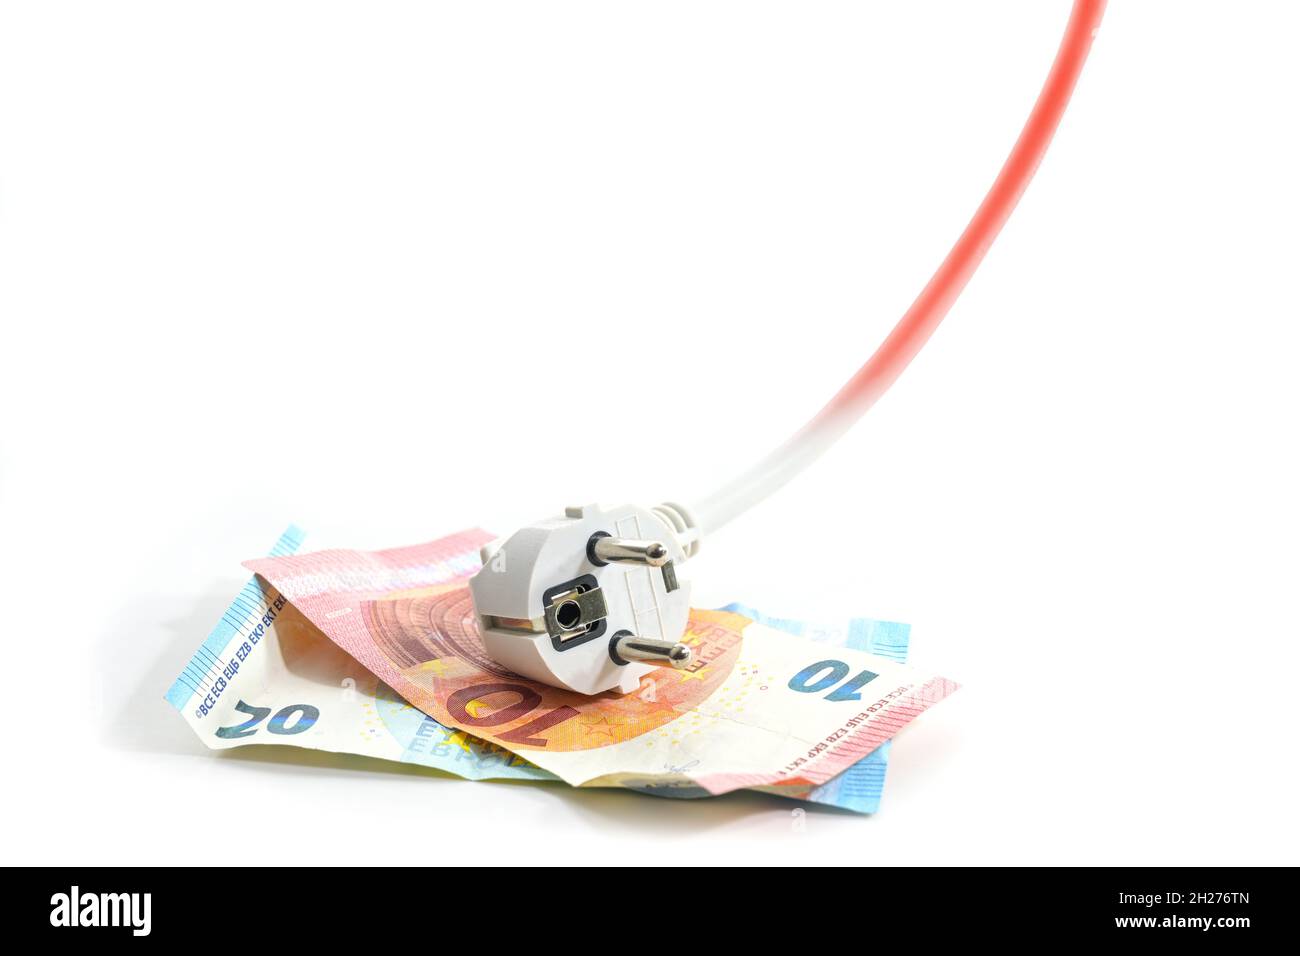 Electric schuko plug lying on euro banknotes, the cable is rising and turns to red, symbol of increasing energy costs, isolated on a white background, Stock Photo